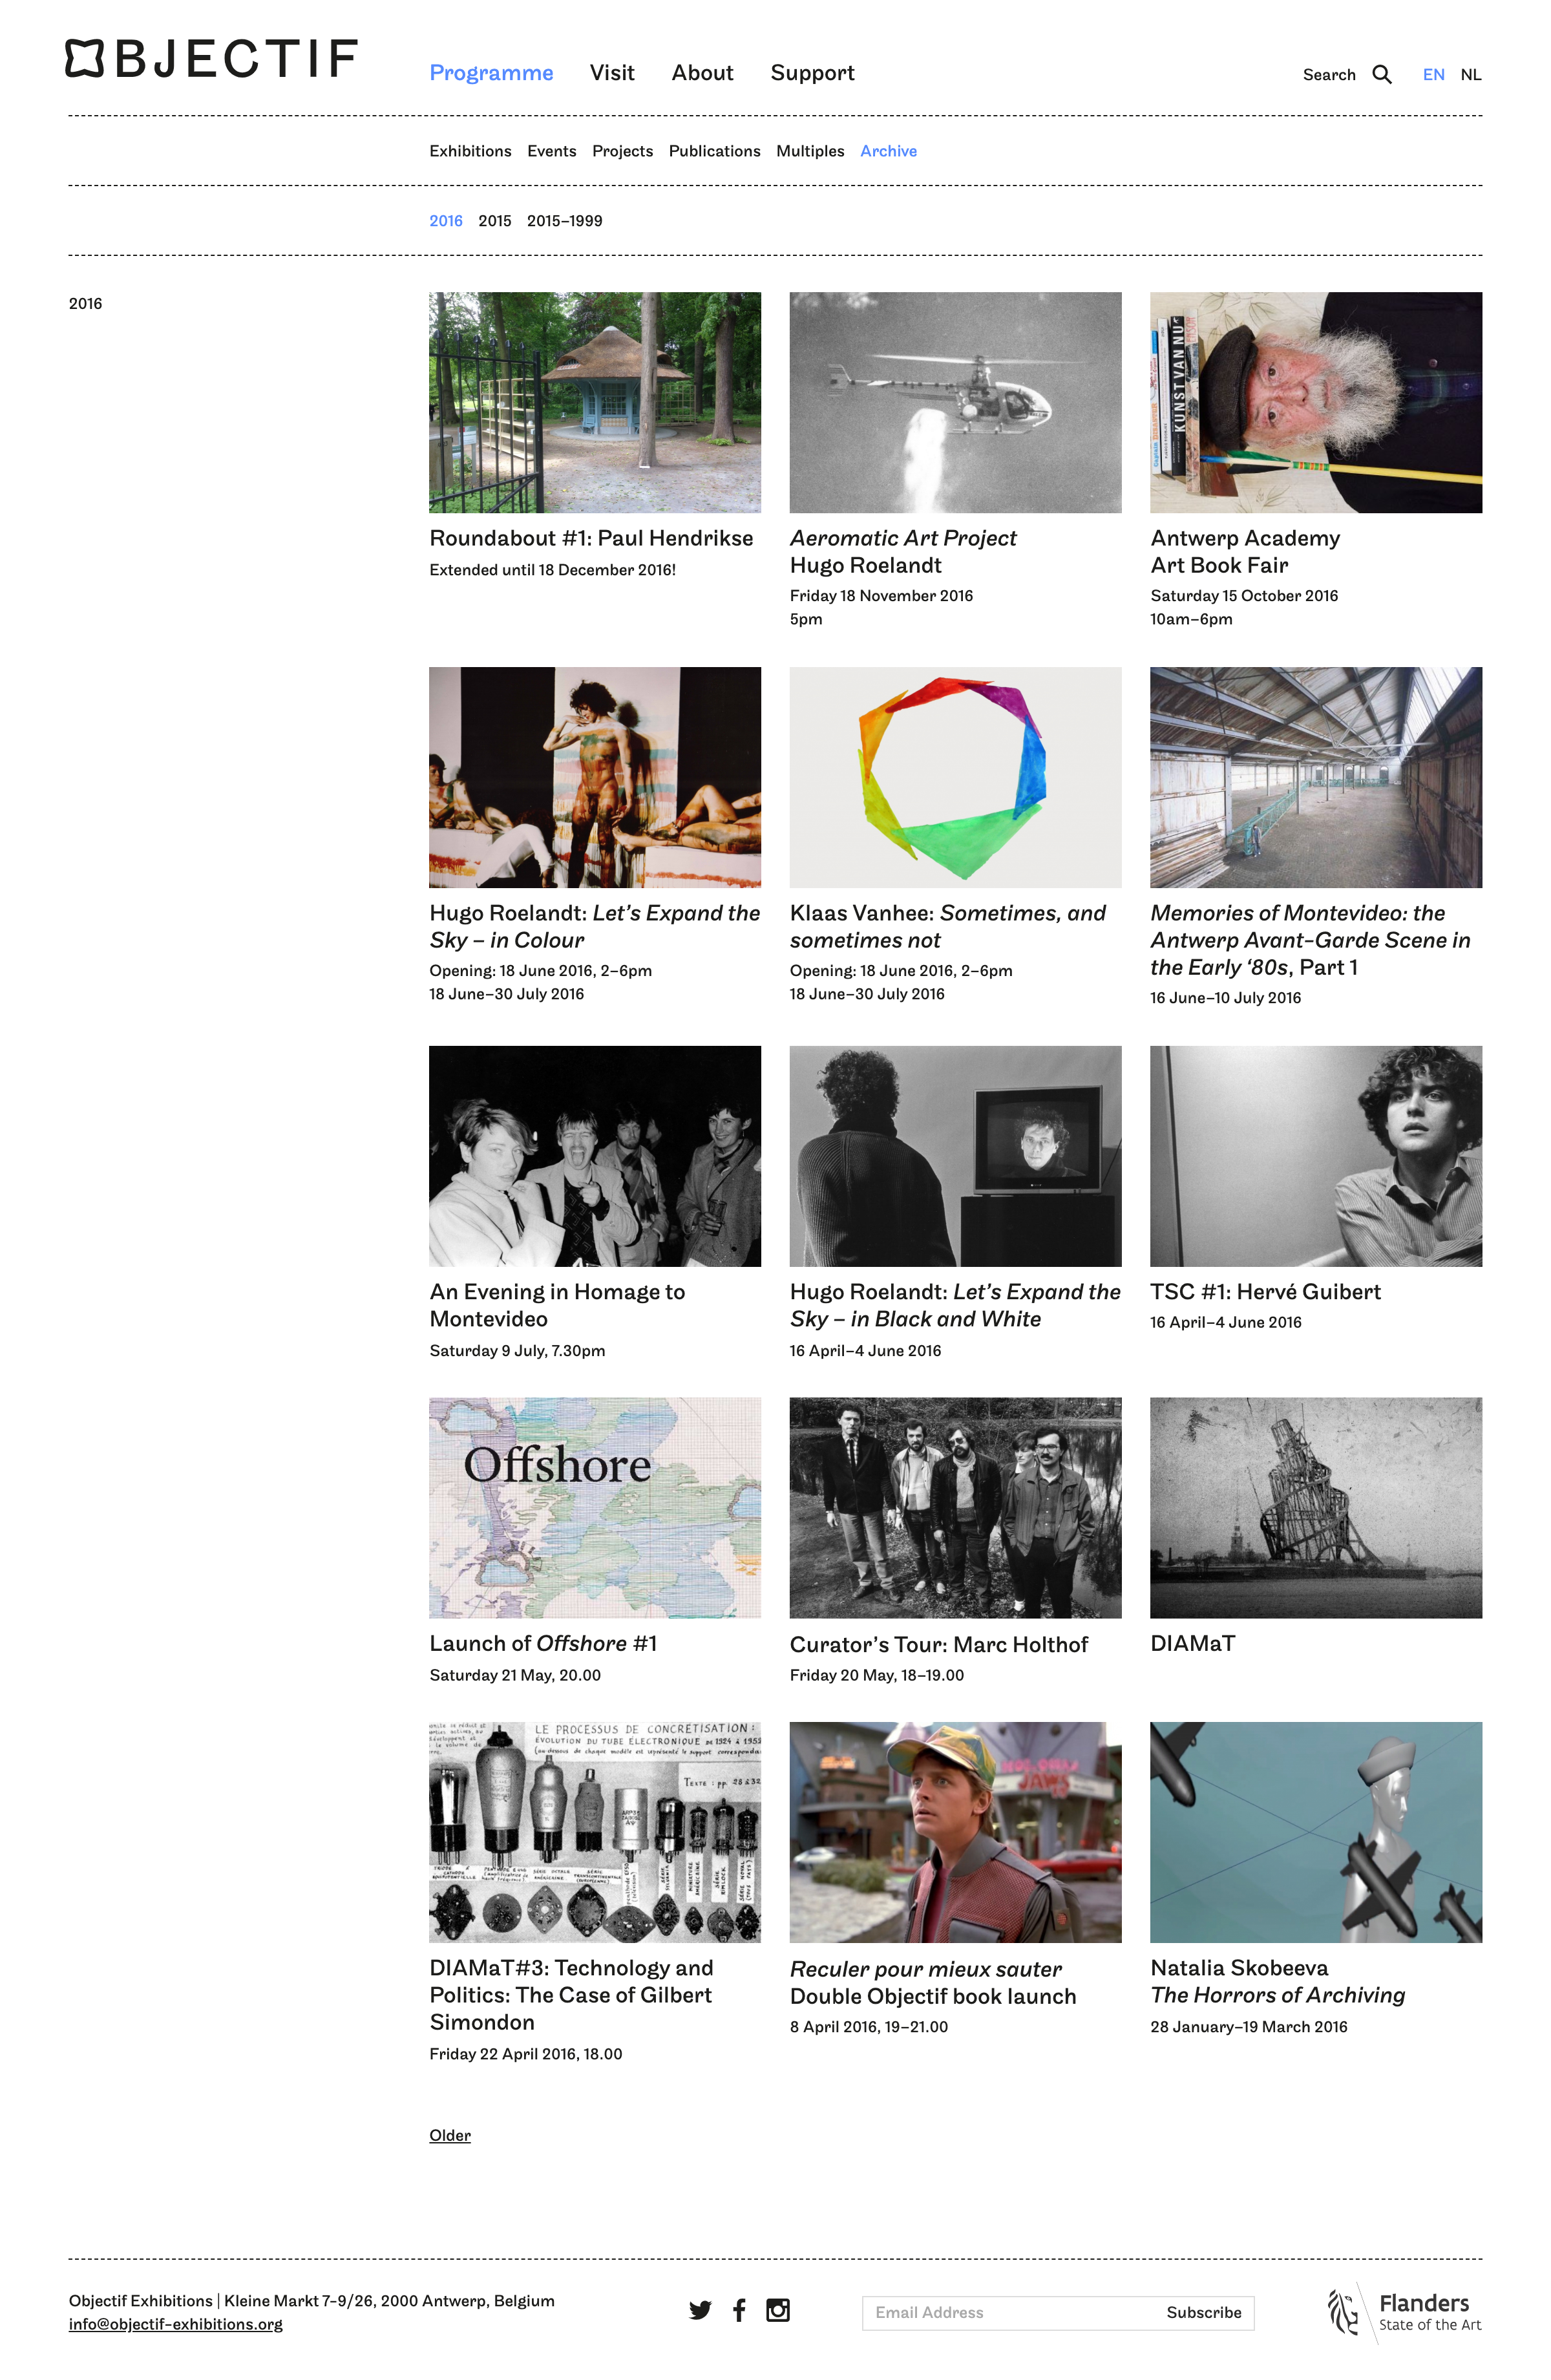 Exhibition archive page